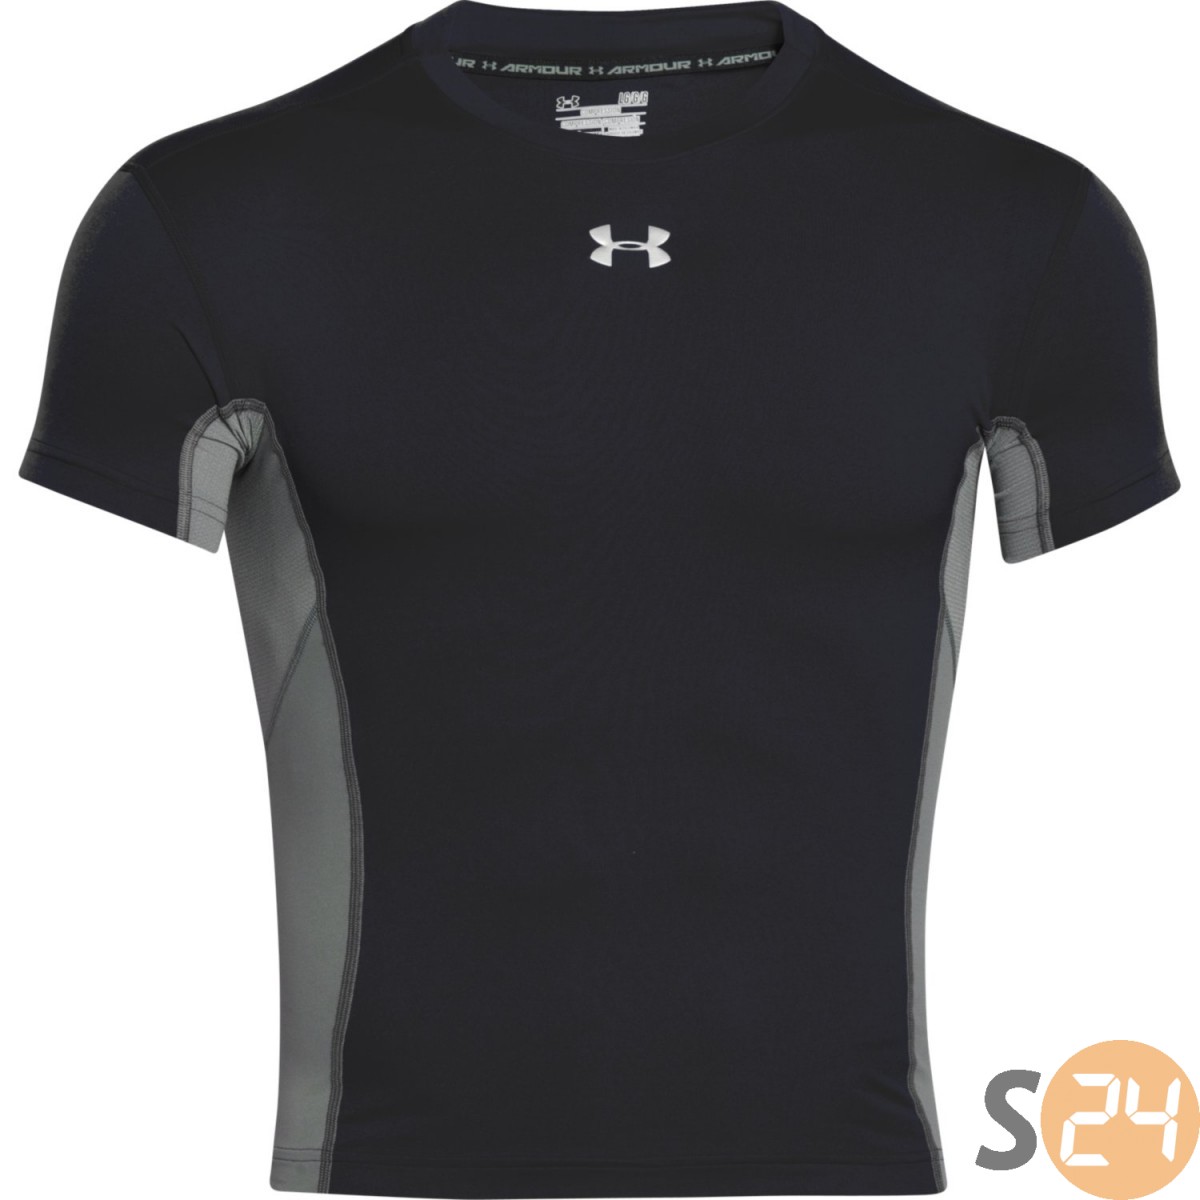 Under armour  Hg armourstretch ss t 1257555-001